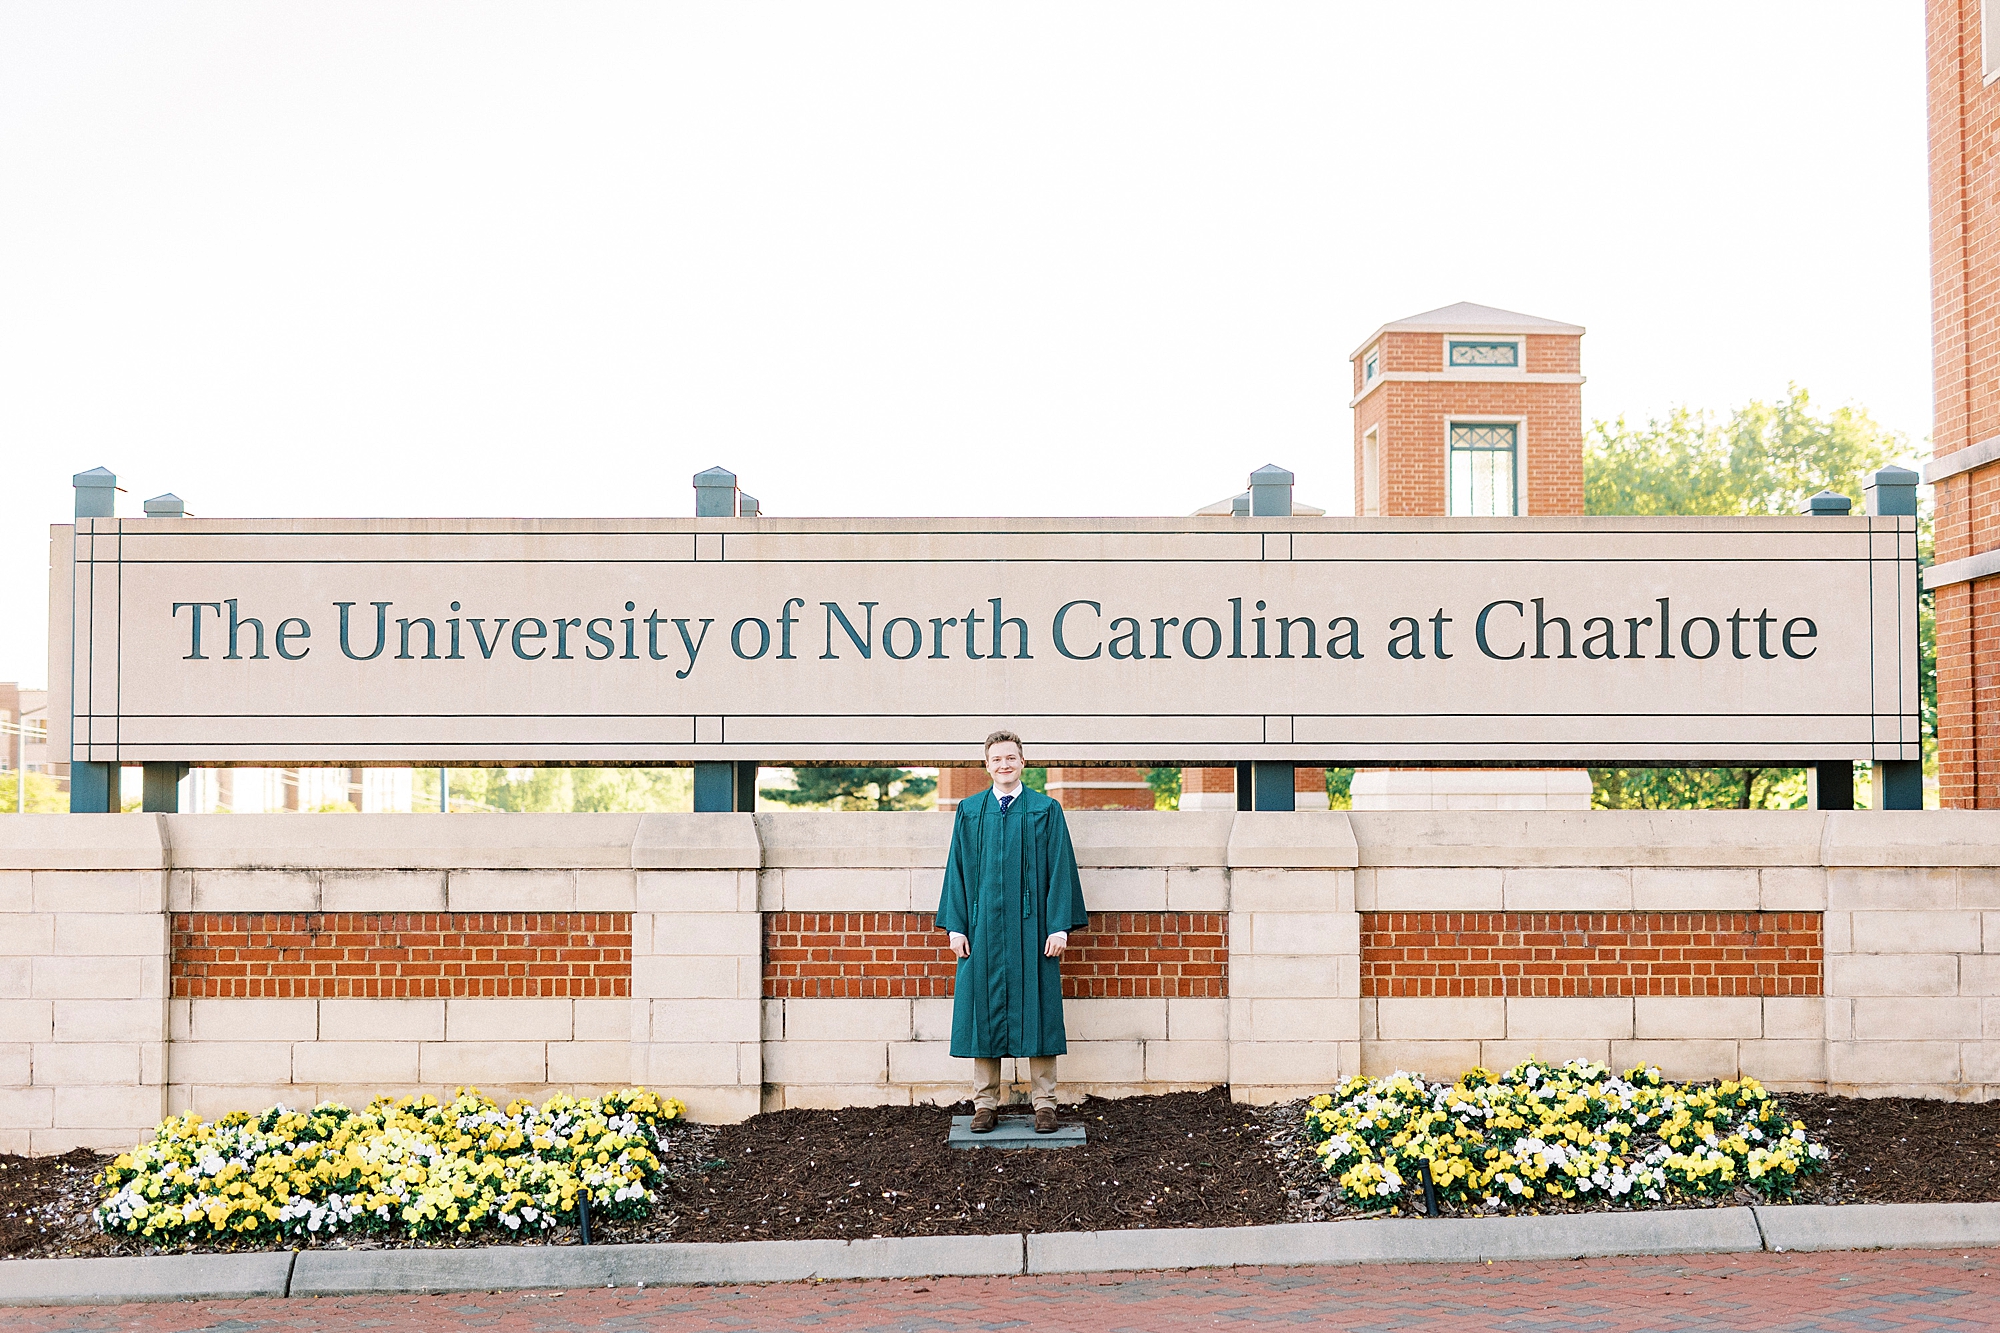 senior in green cap and gown poses by University of North Carolina at Charlotte sign